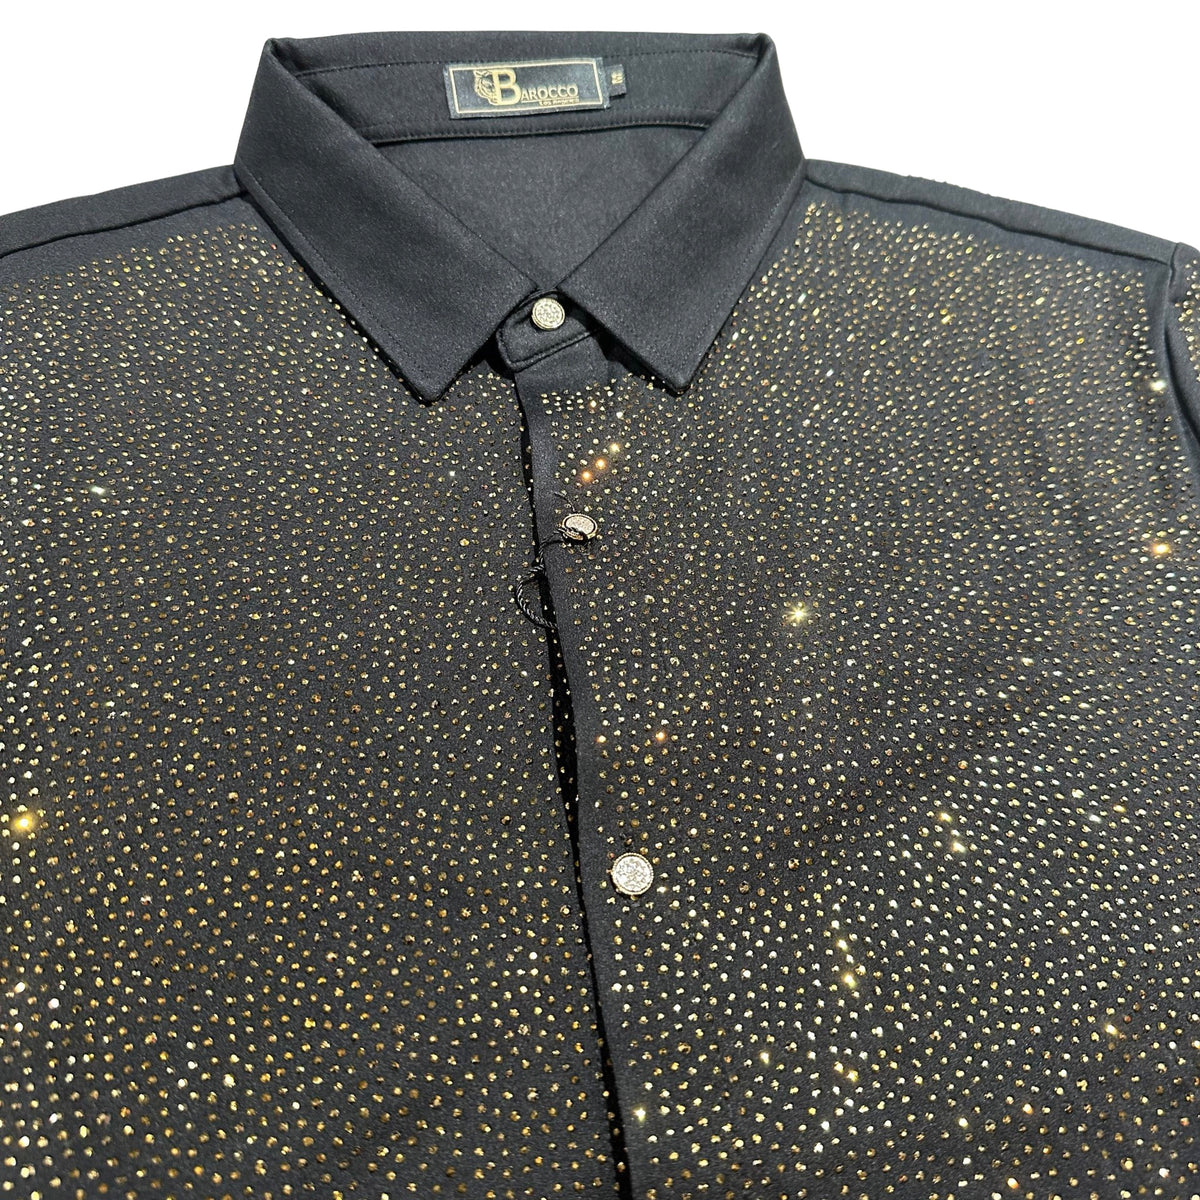 Barocco Black/Gold Fully Loaded Crystal Button Up Shirt - Dudes Boutique